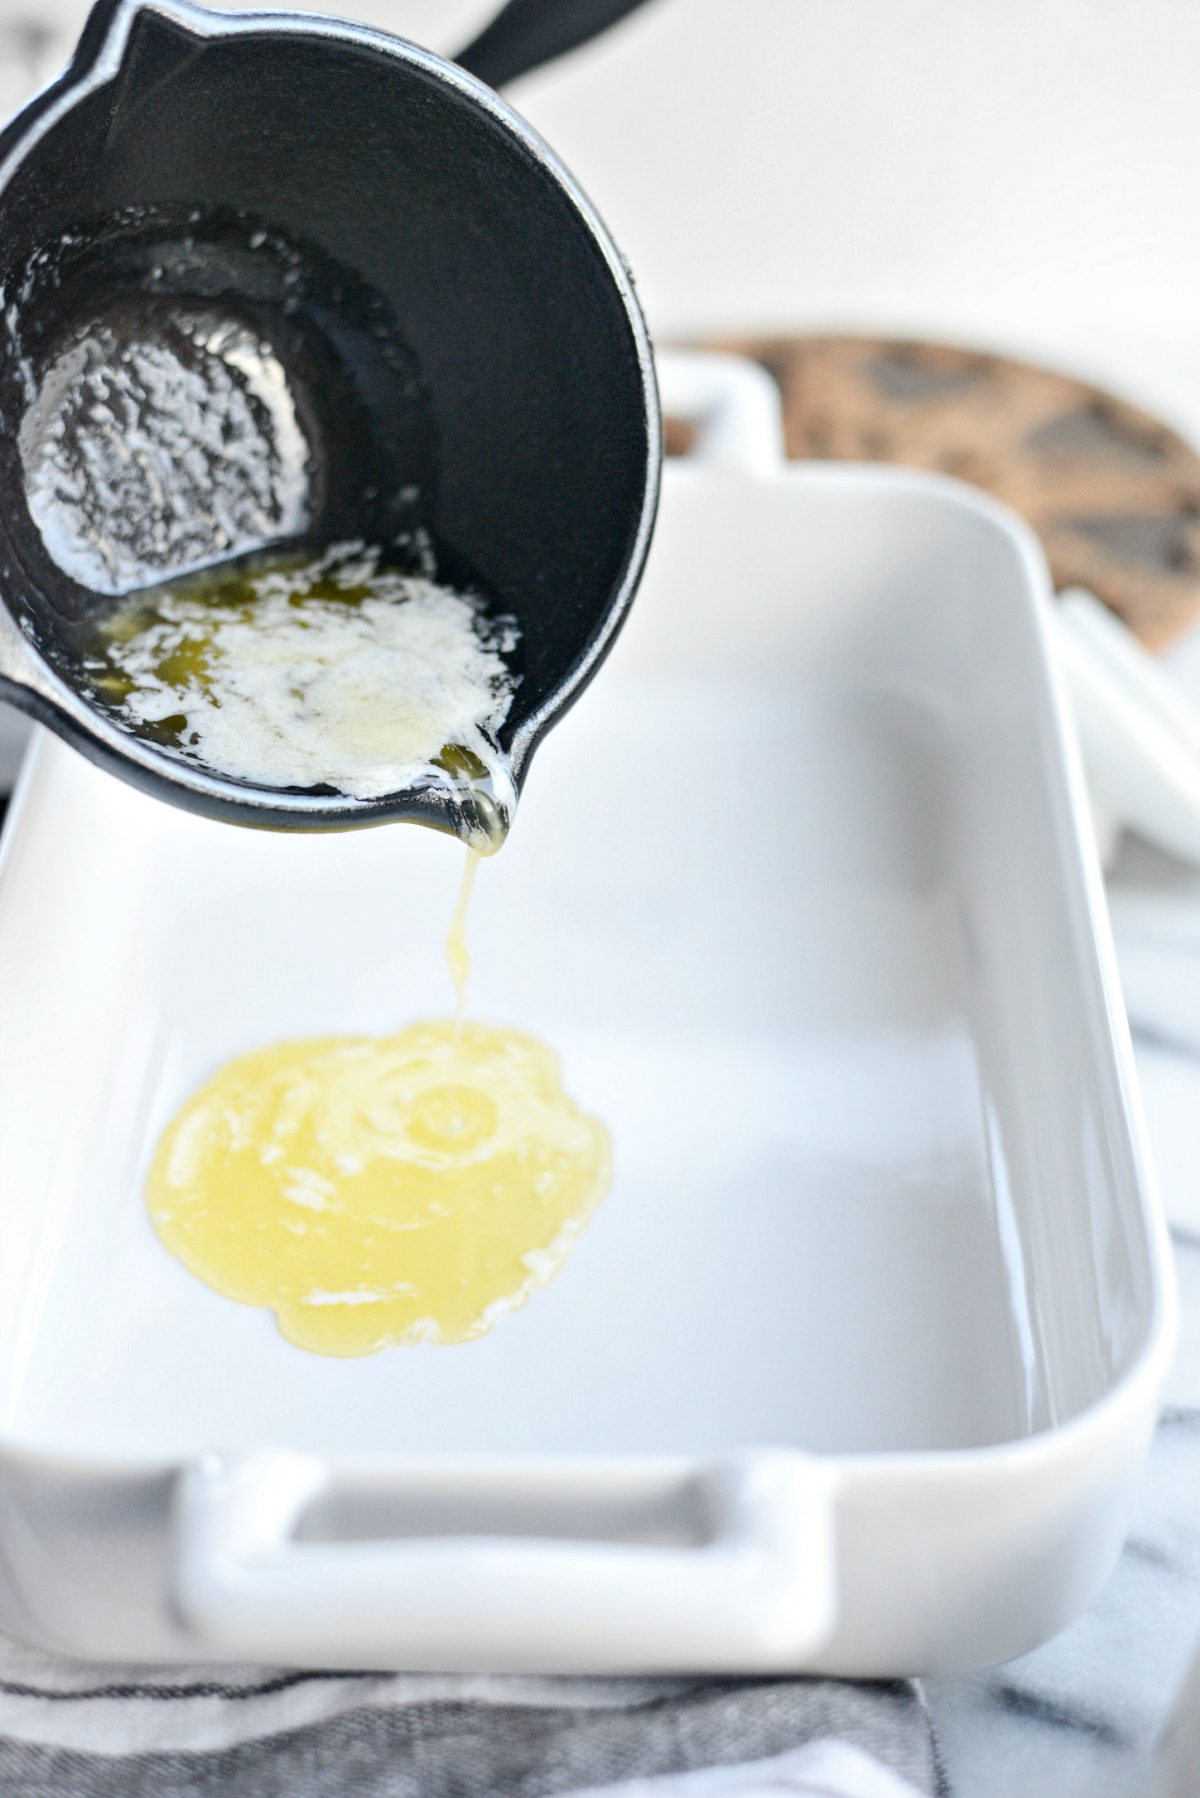 melt butter and add to oven-safe baking dish.